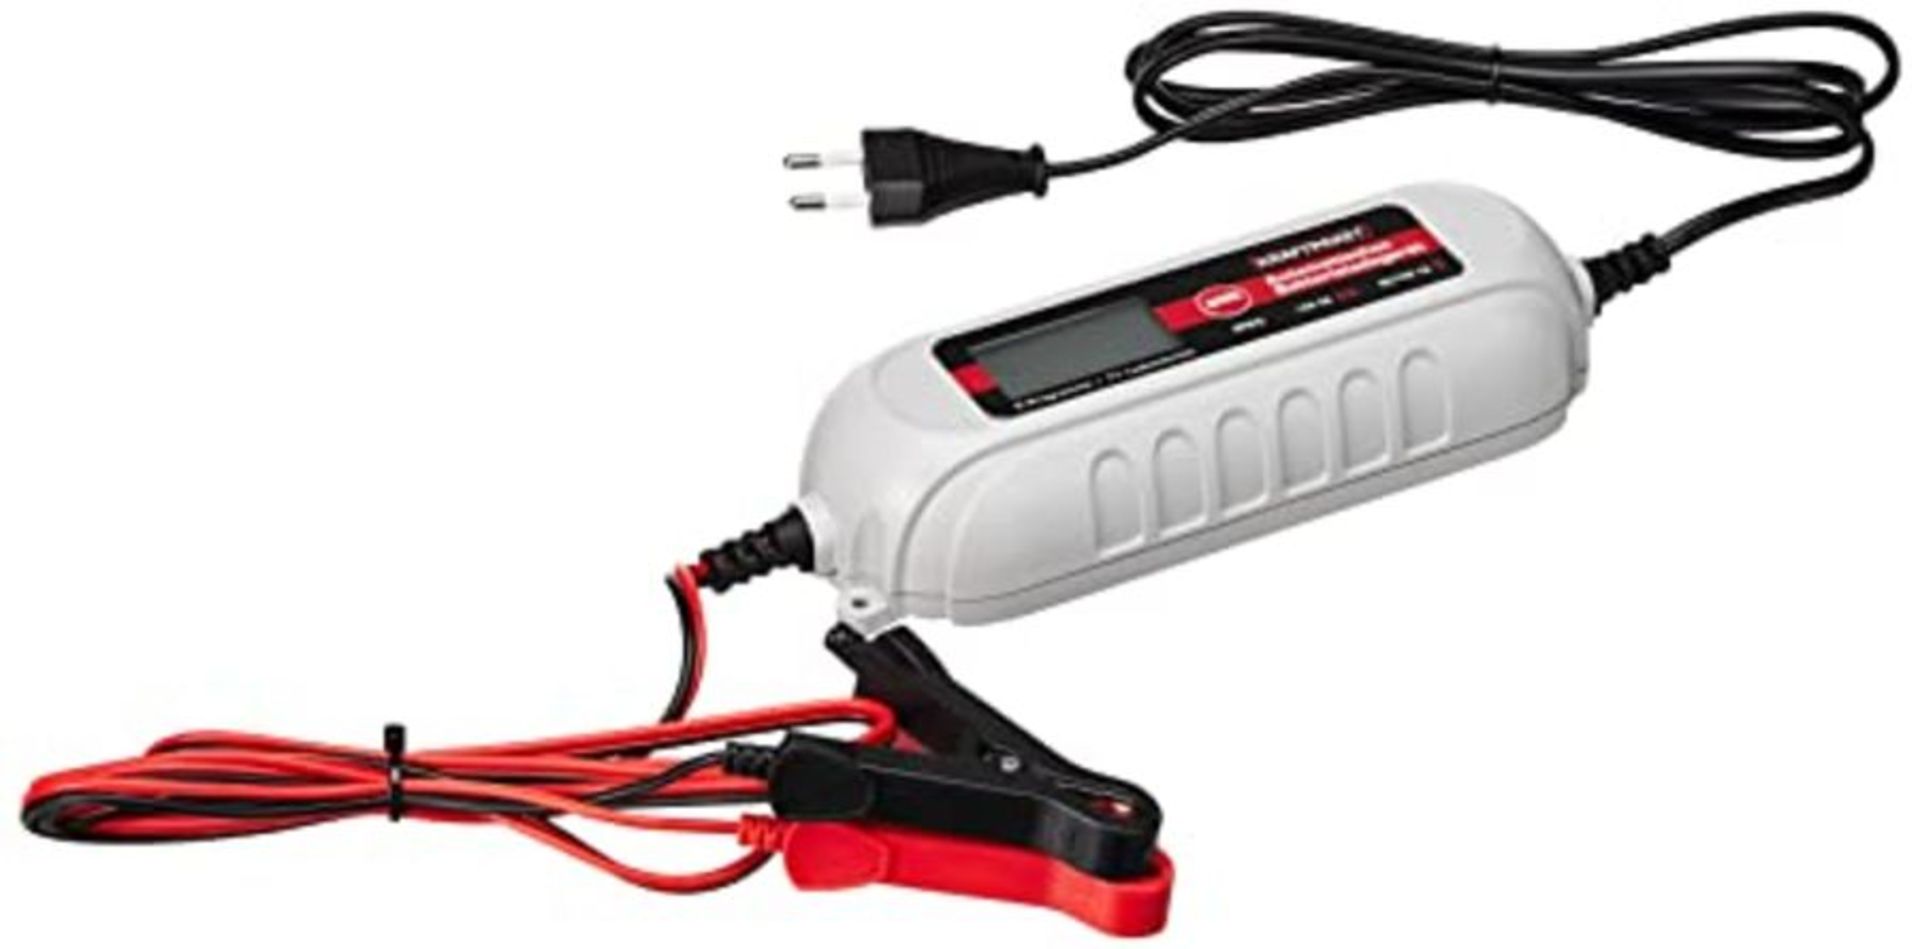 Dinosaur Power Pack 6 V/12 V/4 A Battery Charger with Tester. IP65 for Vehicle Car